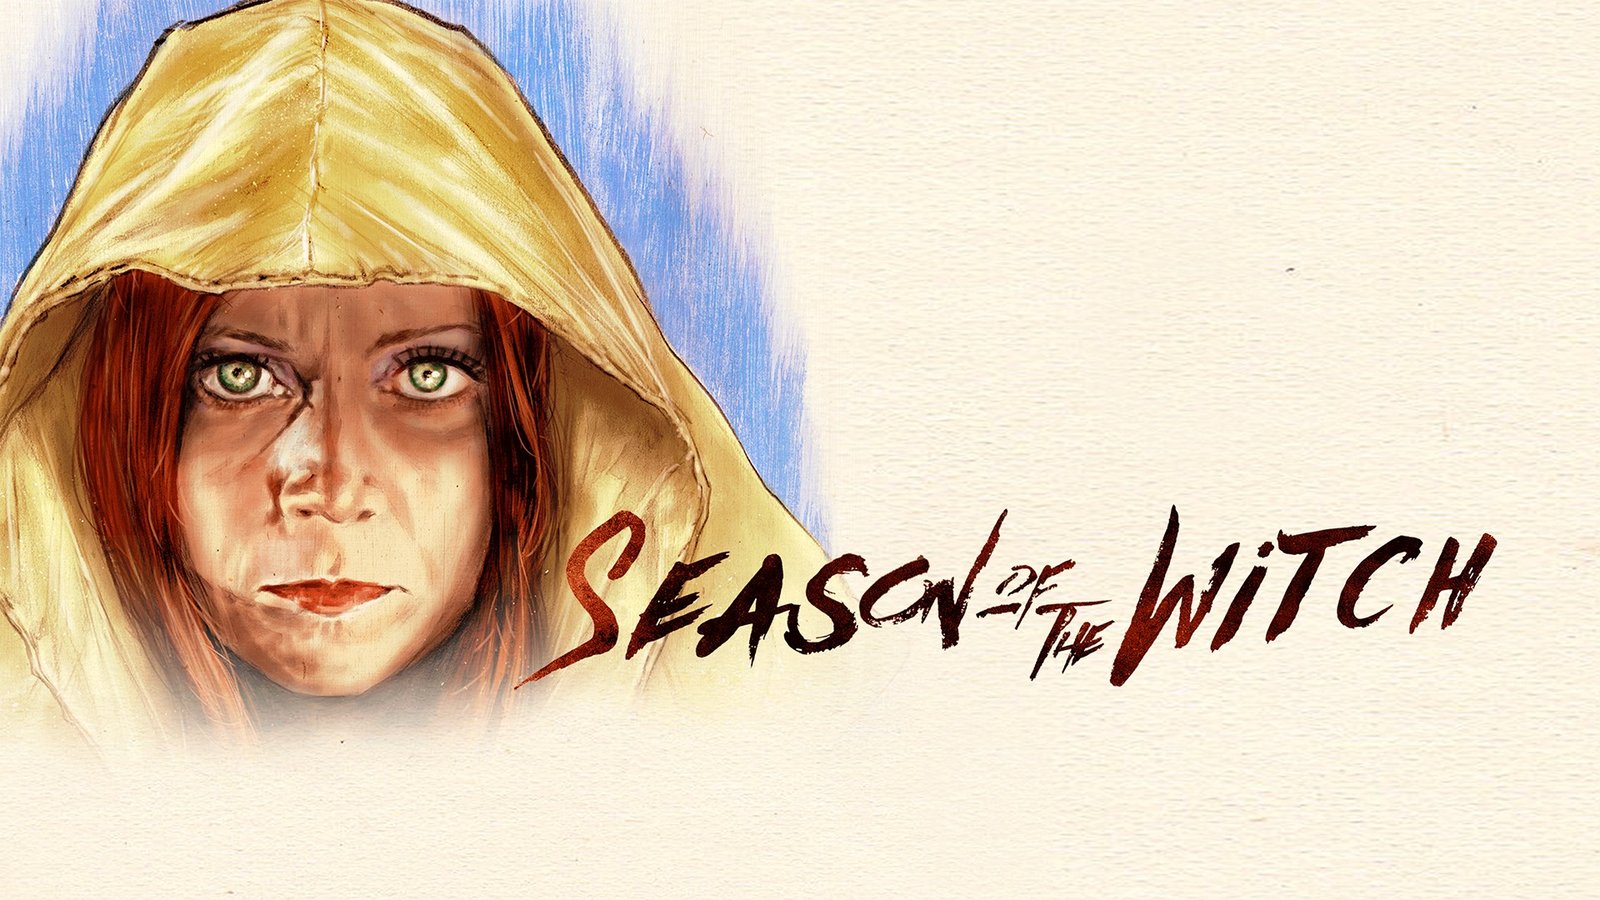 Season of the Witch - Hungry Wives